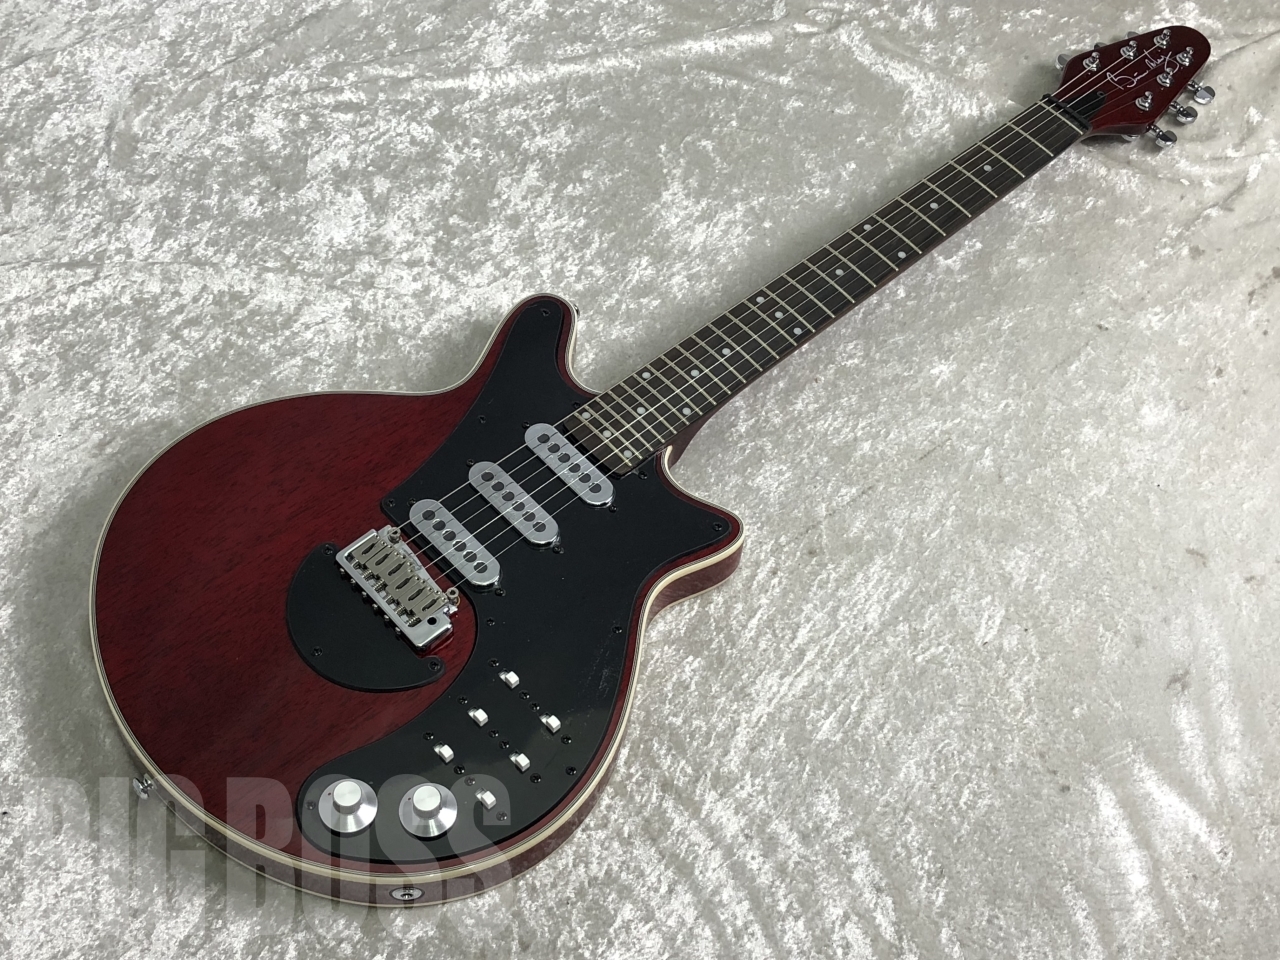 ZO-3BM(Brian May Red Special風仕様)ほぼ未使用特価! - エレキギター